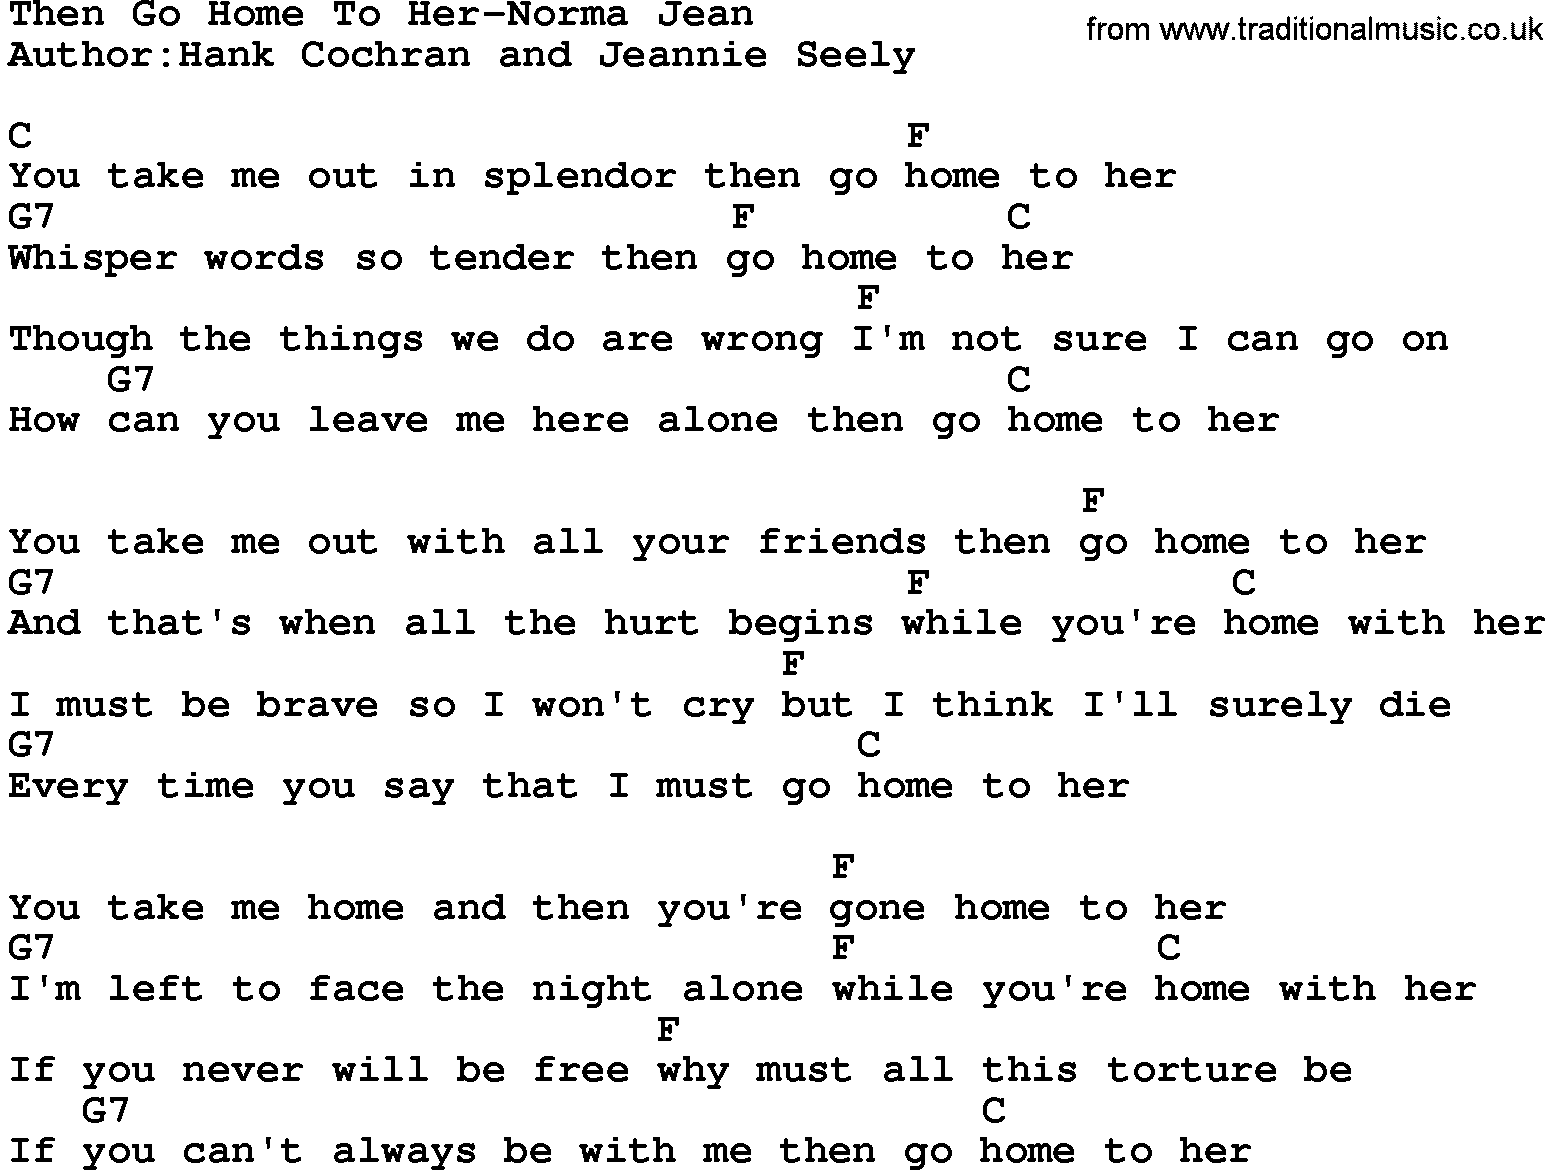 Country music song: Then Go Home To Her-Norma Jean lyrics and chords